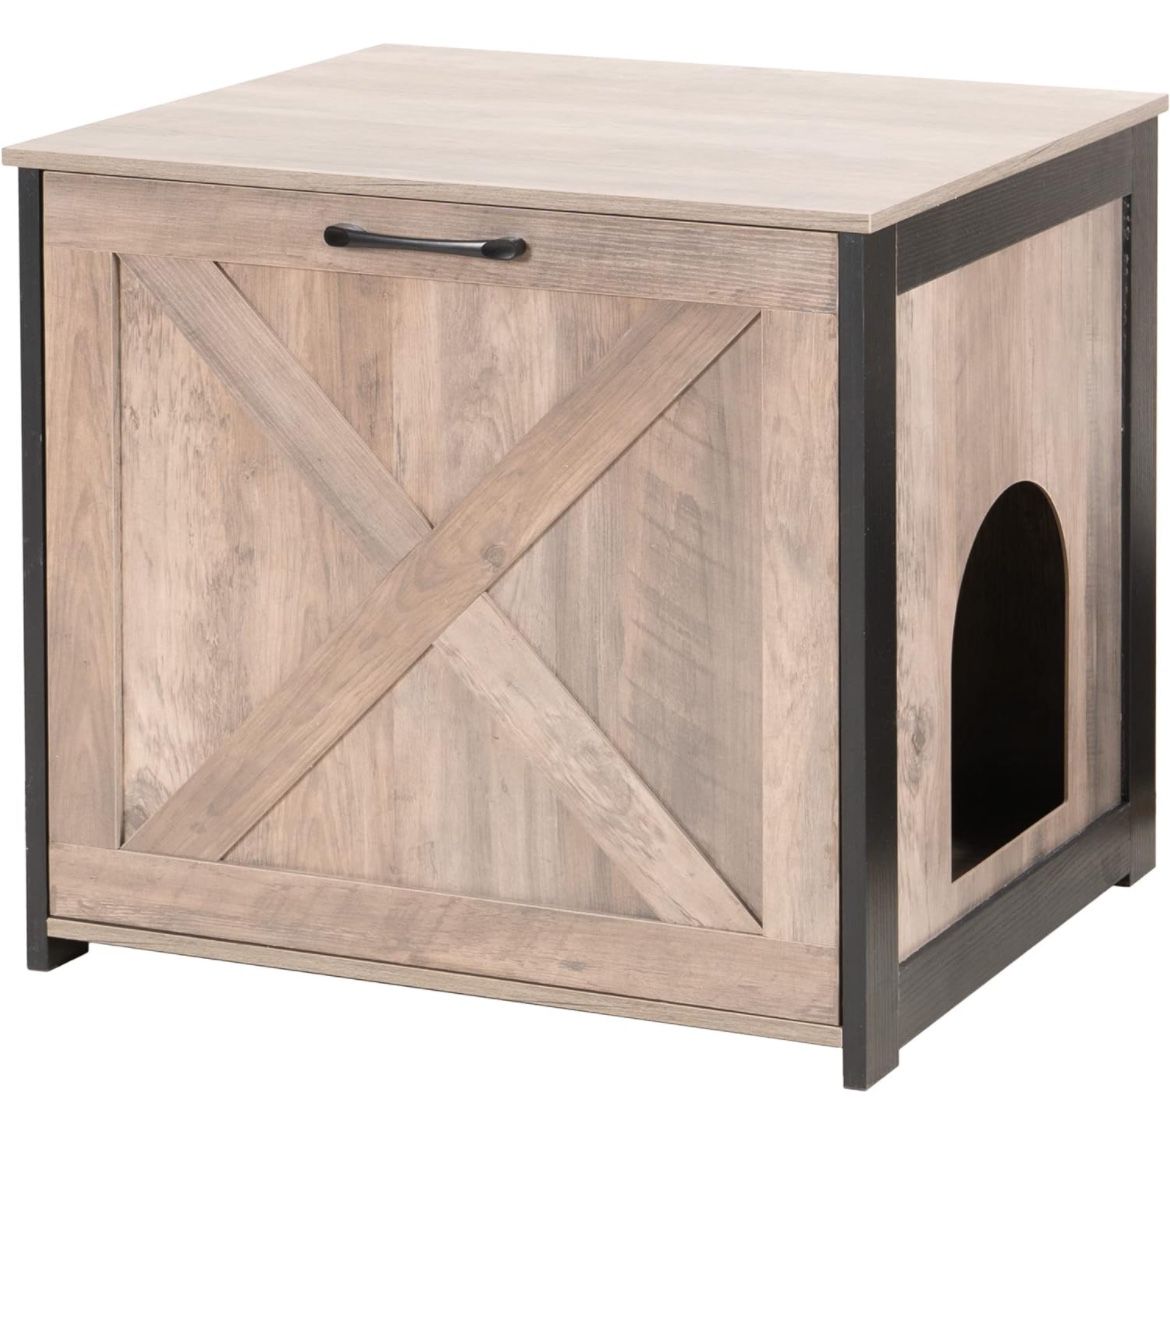 DWANTON Cat Litter Box Furniture Hidden, Cat Litter Box Enclosure, Reversible Entrance Can Be on Left or Right Side, Indoor Cat Box Cabinet, Wooden Ca